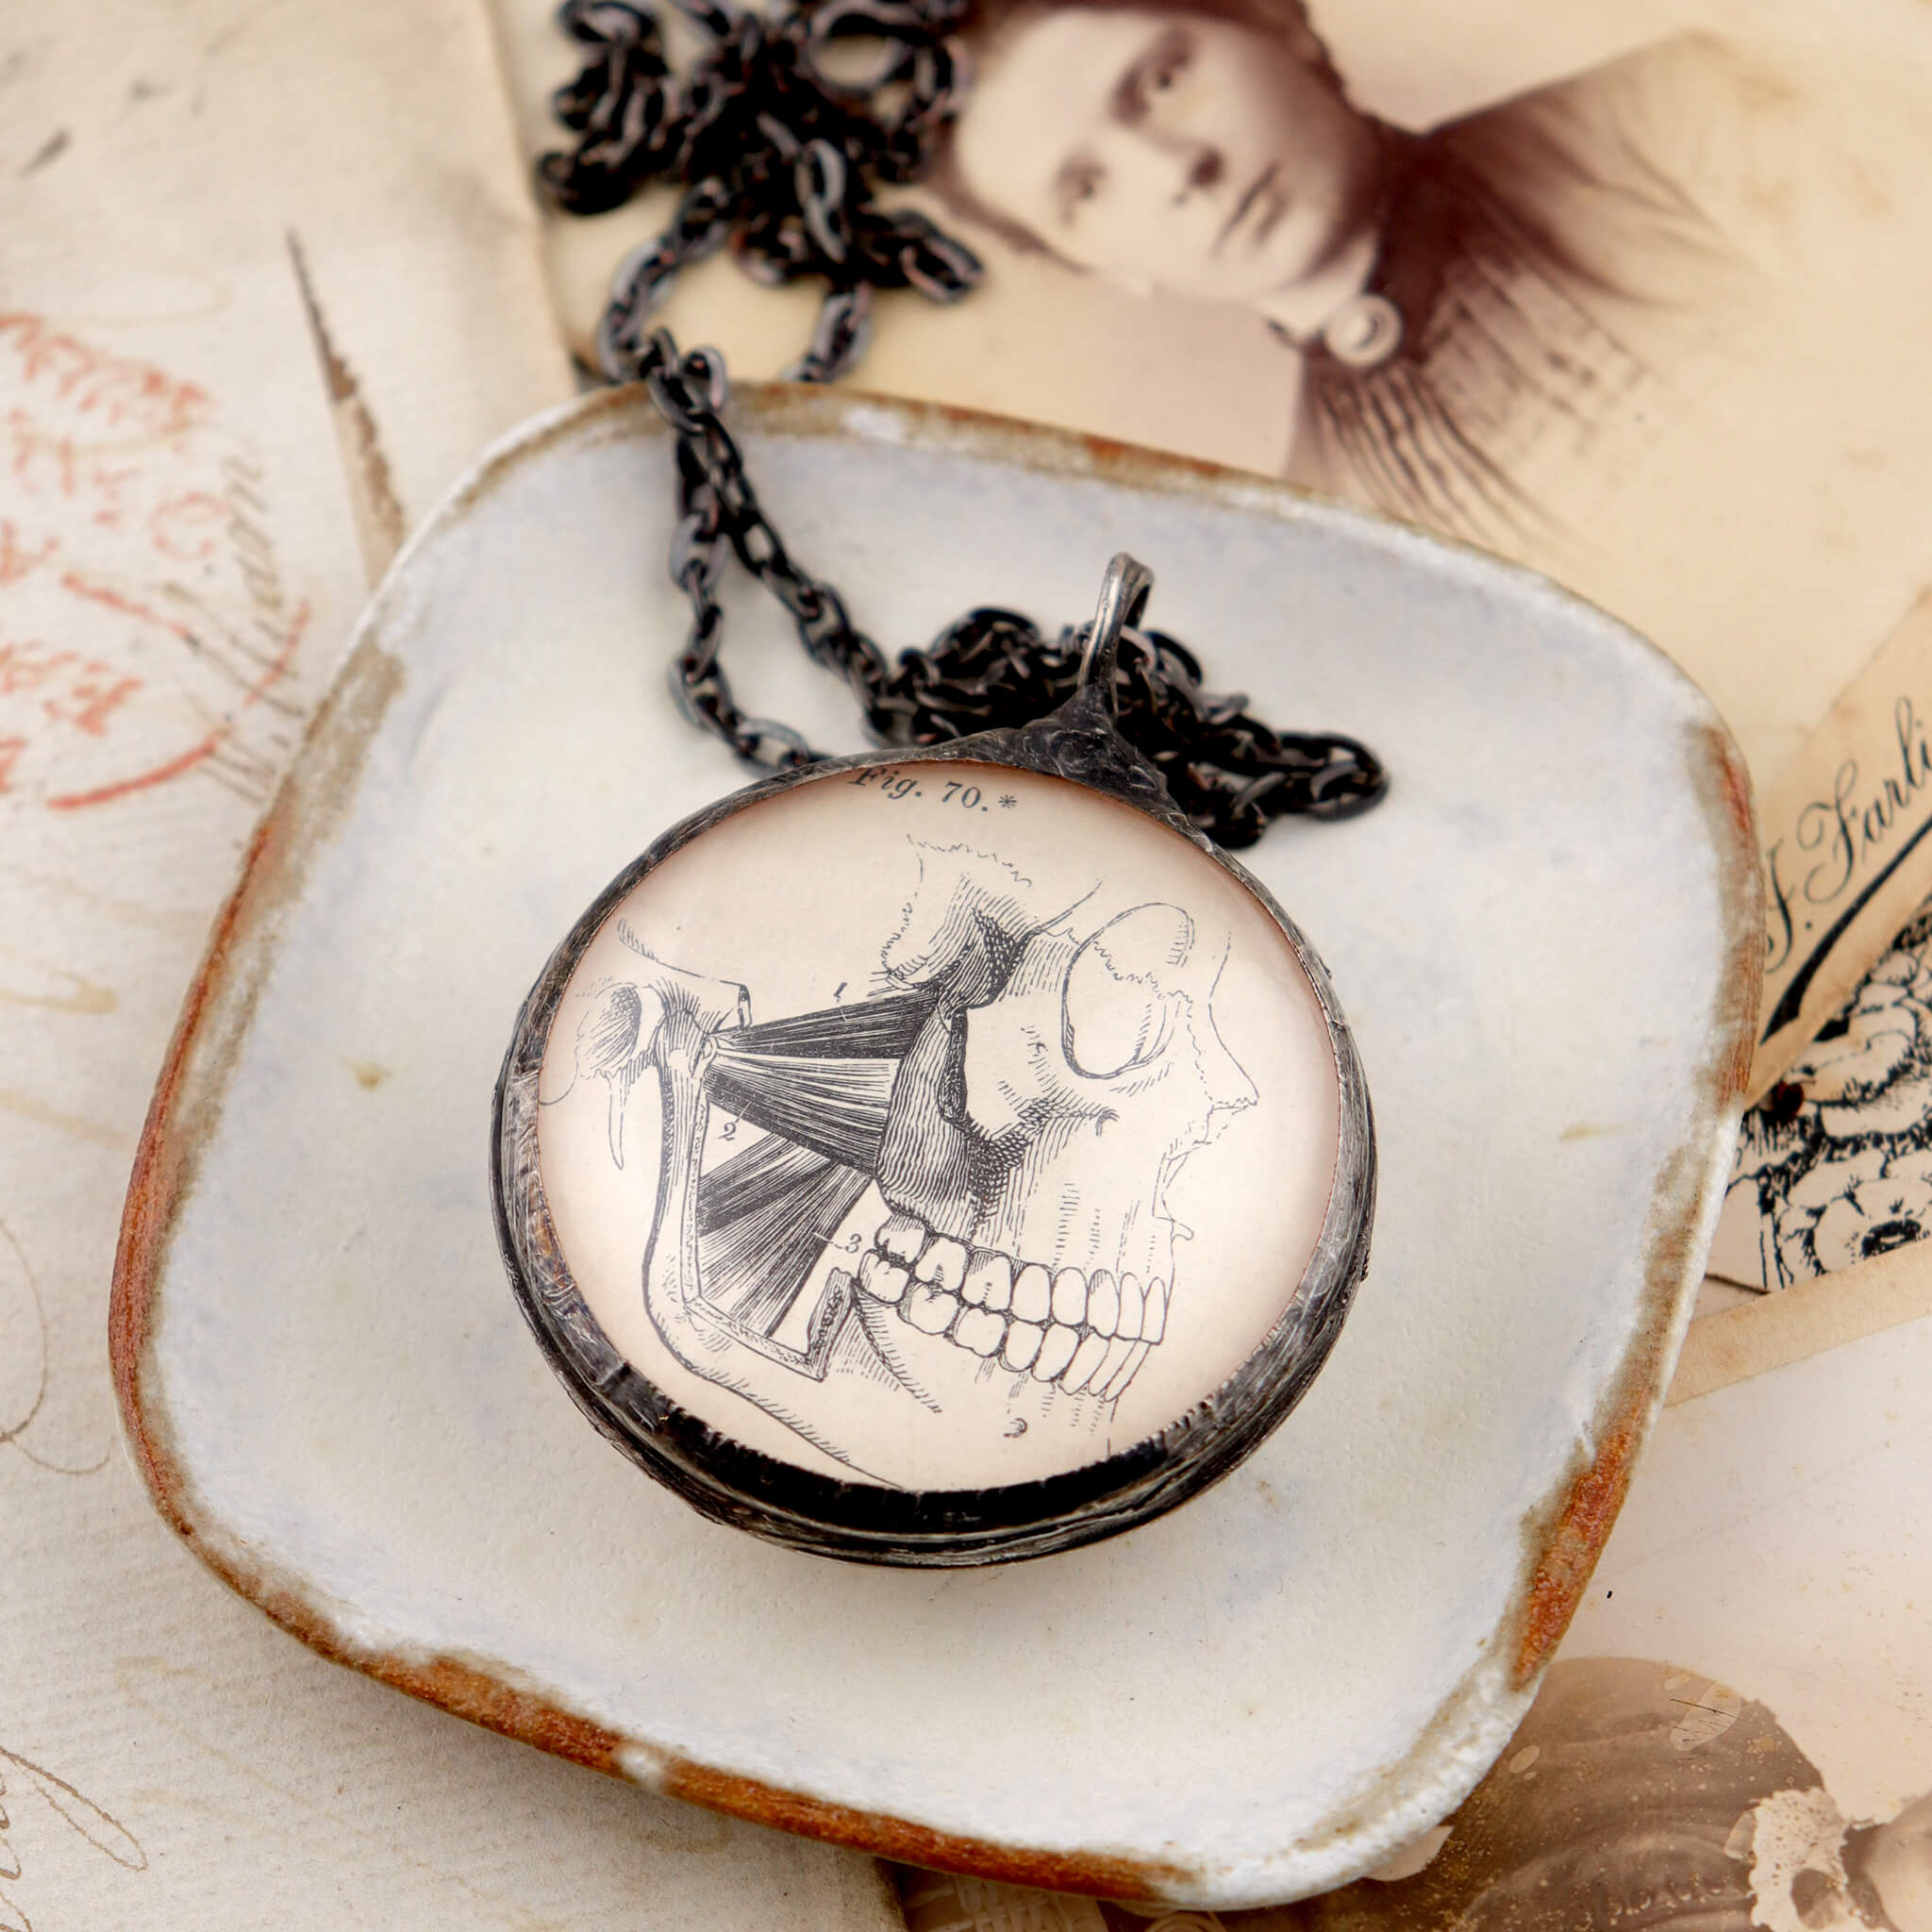 dark academia skull illustration necklace lying on piece of pottery and antique portrait